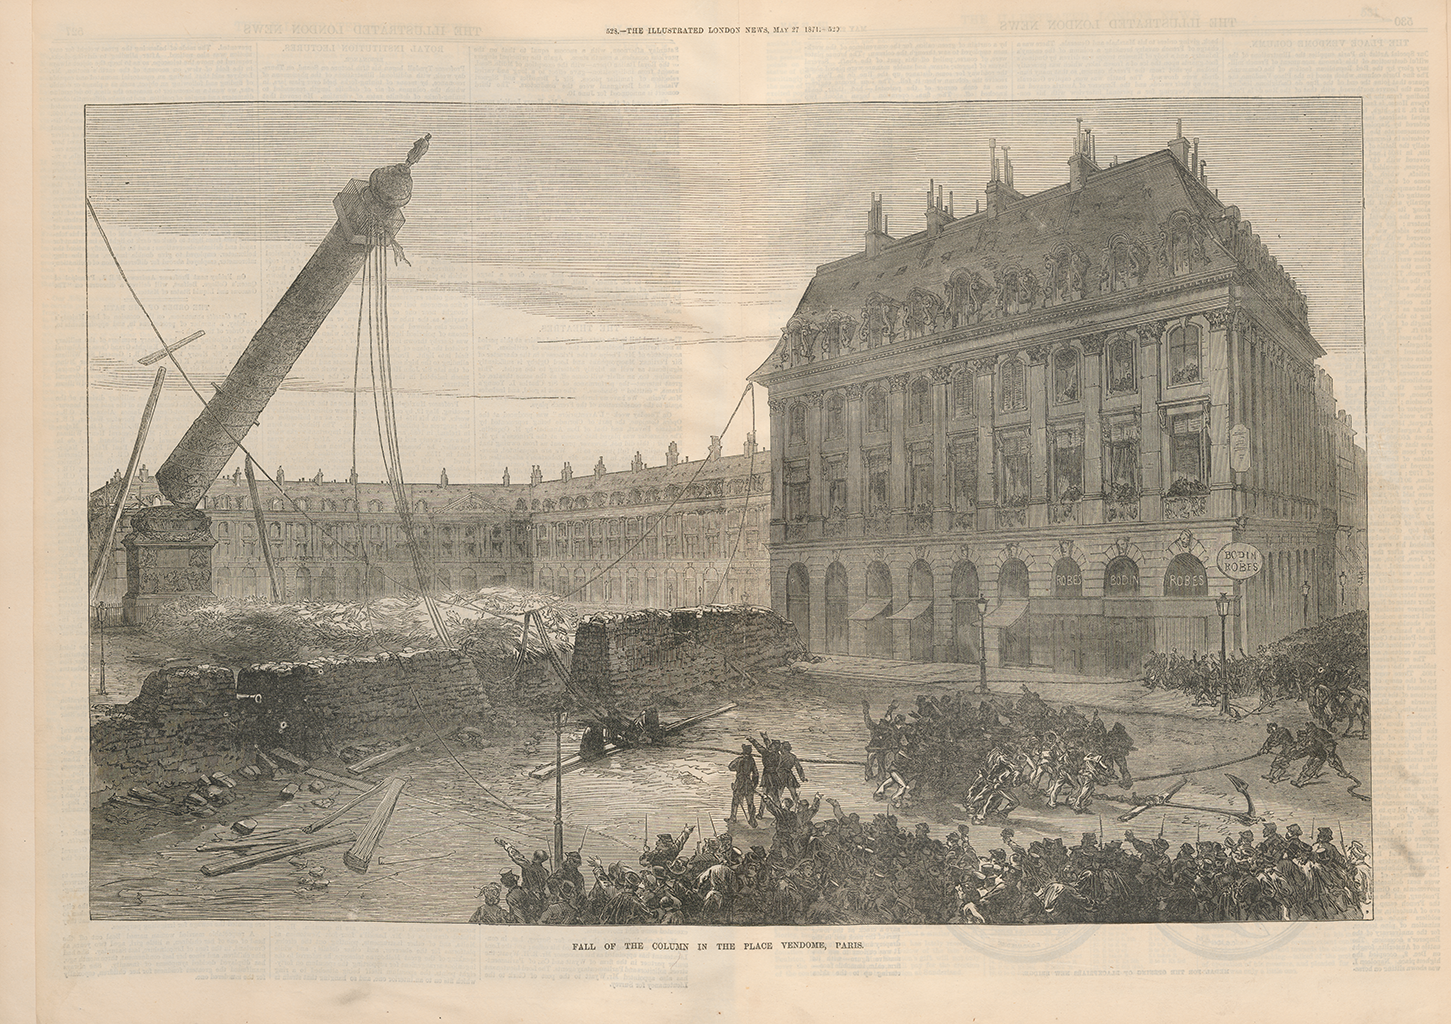 A photograph of a black and white print depicting a large group of people standing around a large building. They stand facing toward a crumbling wall. In the image, there is also a large pillar being brought down by ropes.